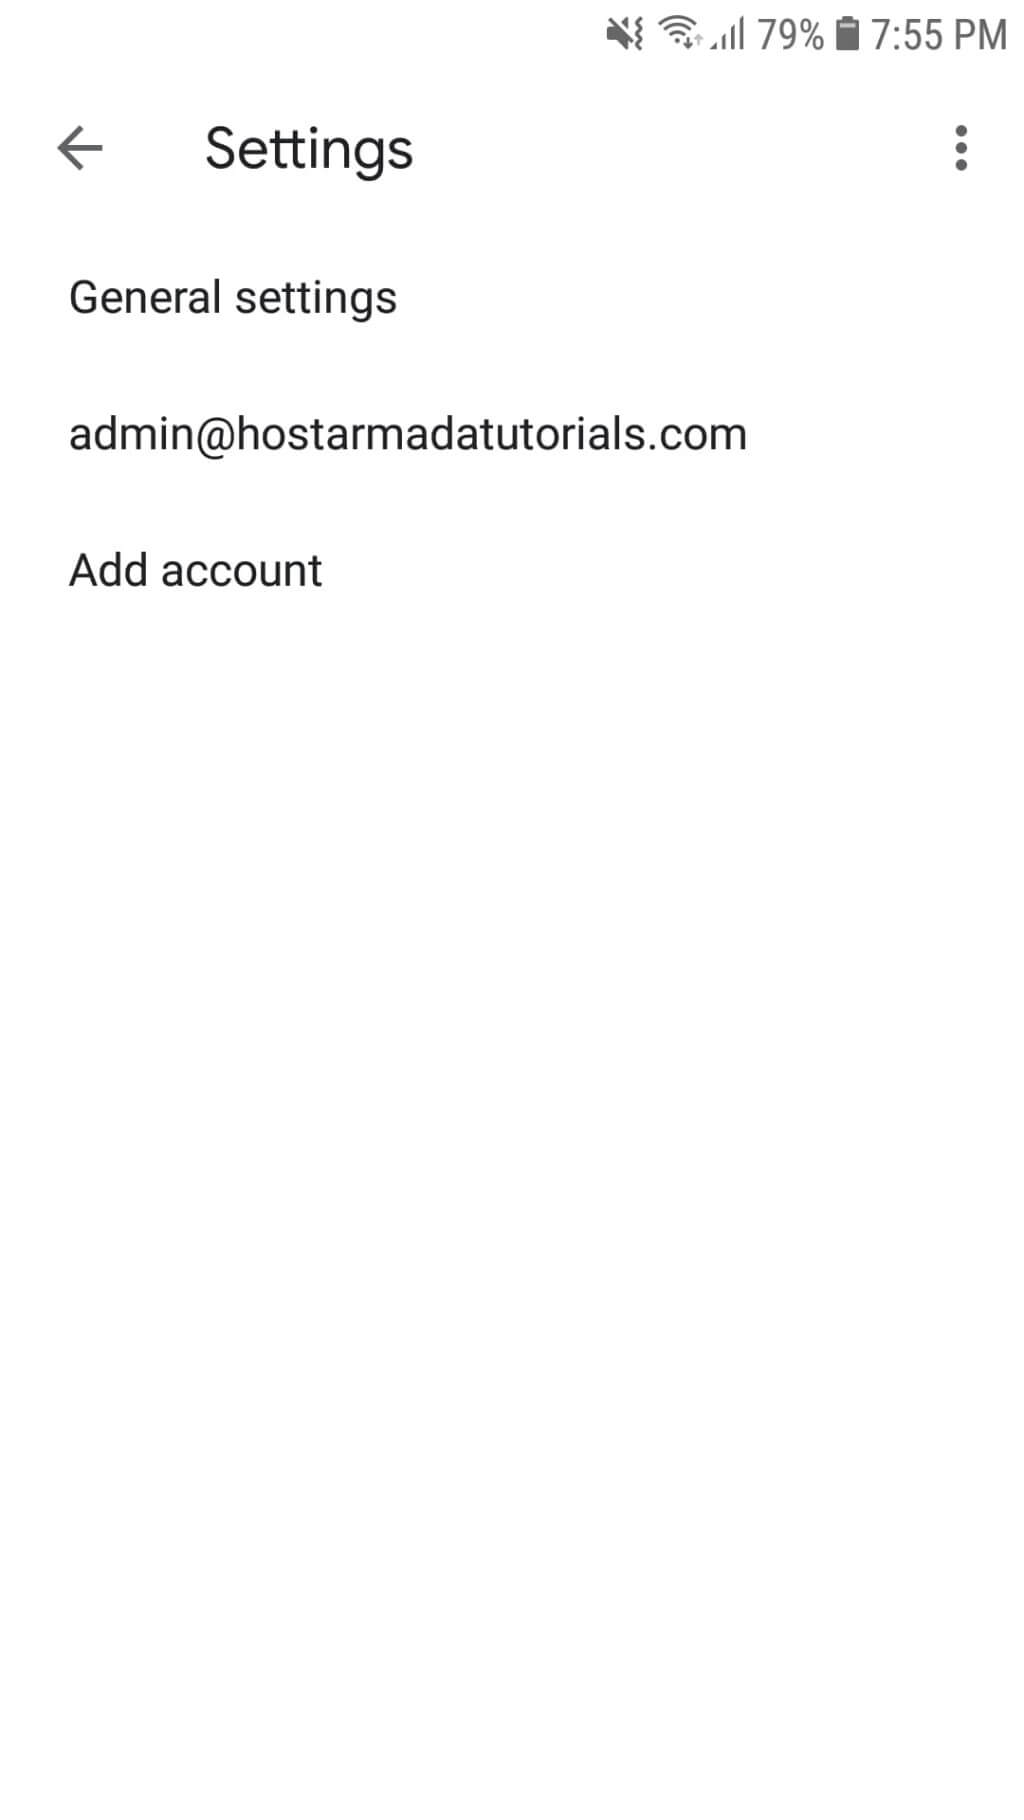 Selecting the email account to edit